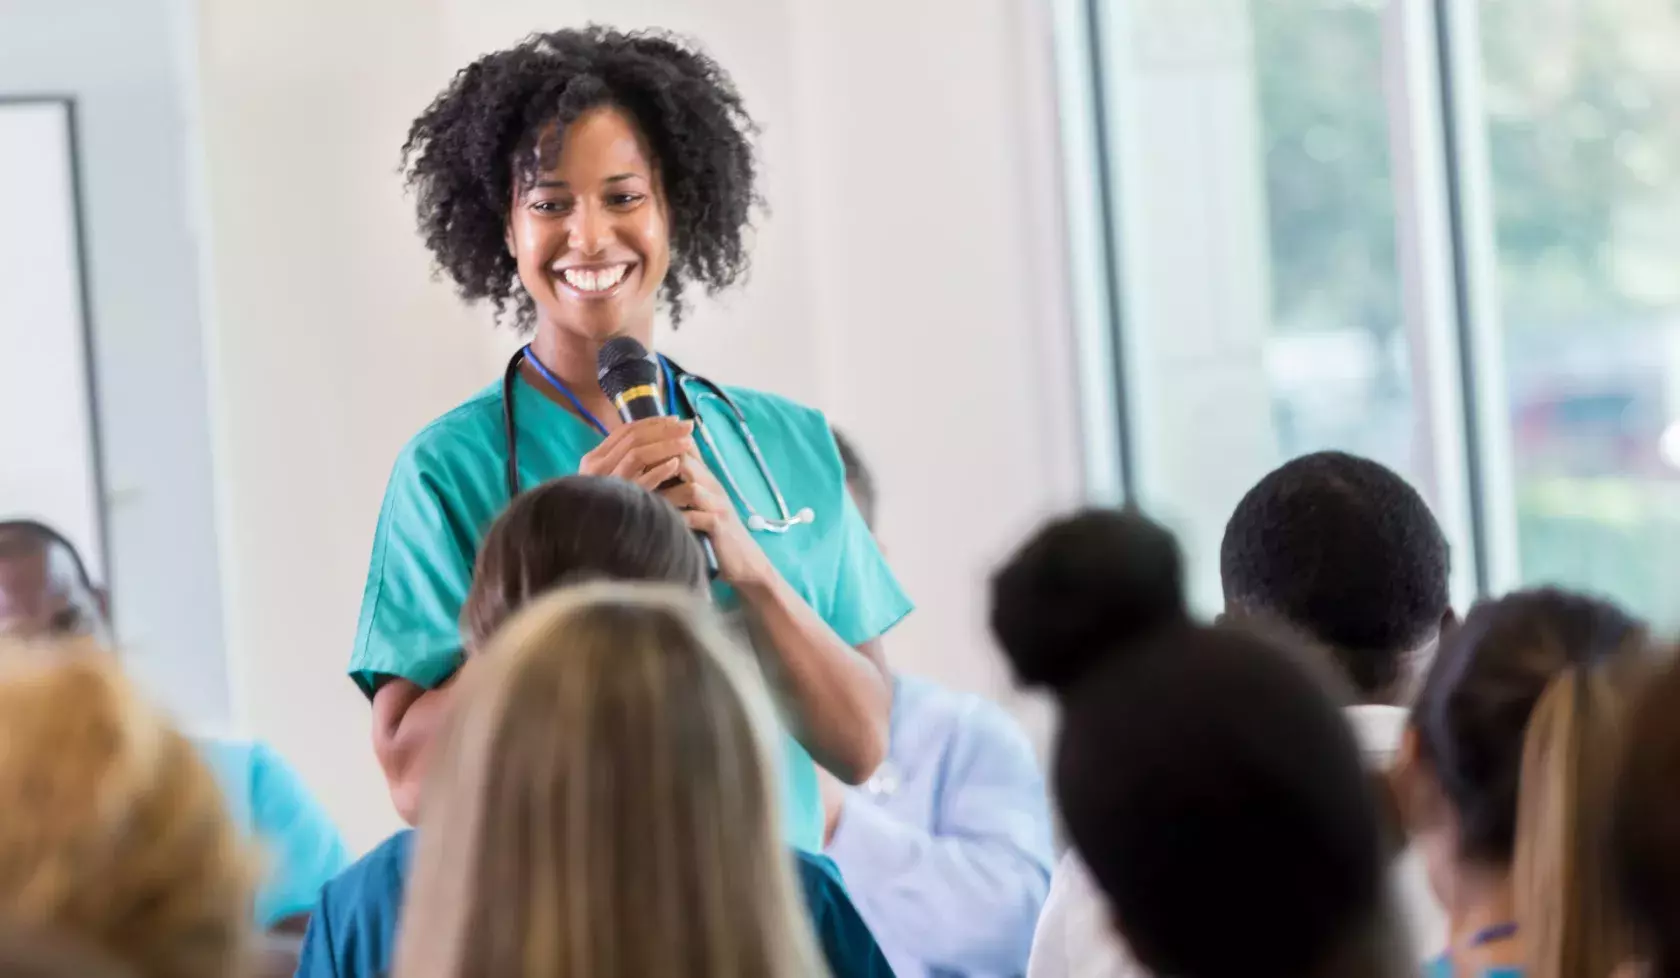 Smiling Black Female Health Professional Holding Microphone and Standing in Front of Audience